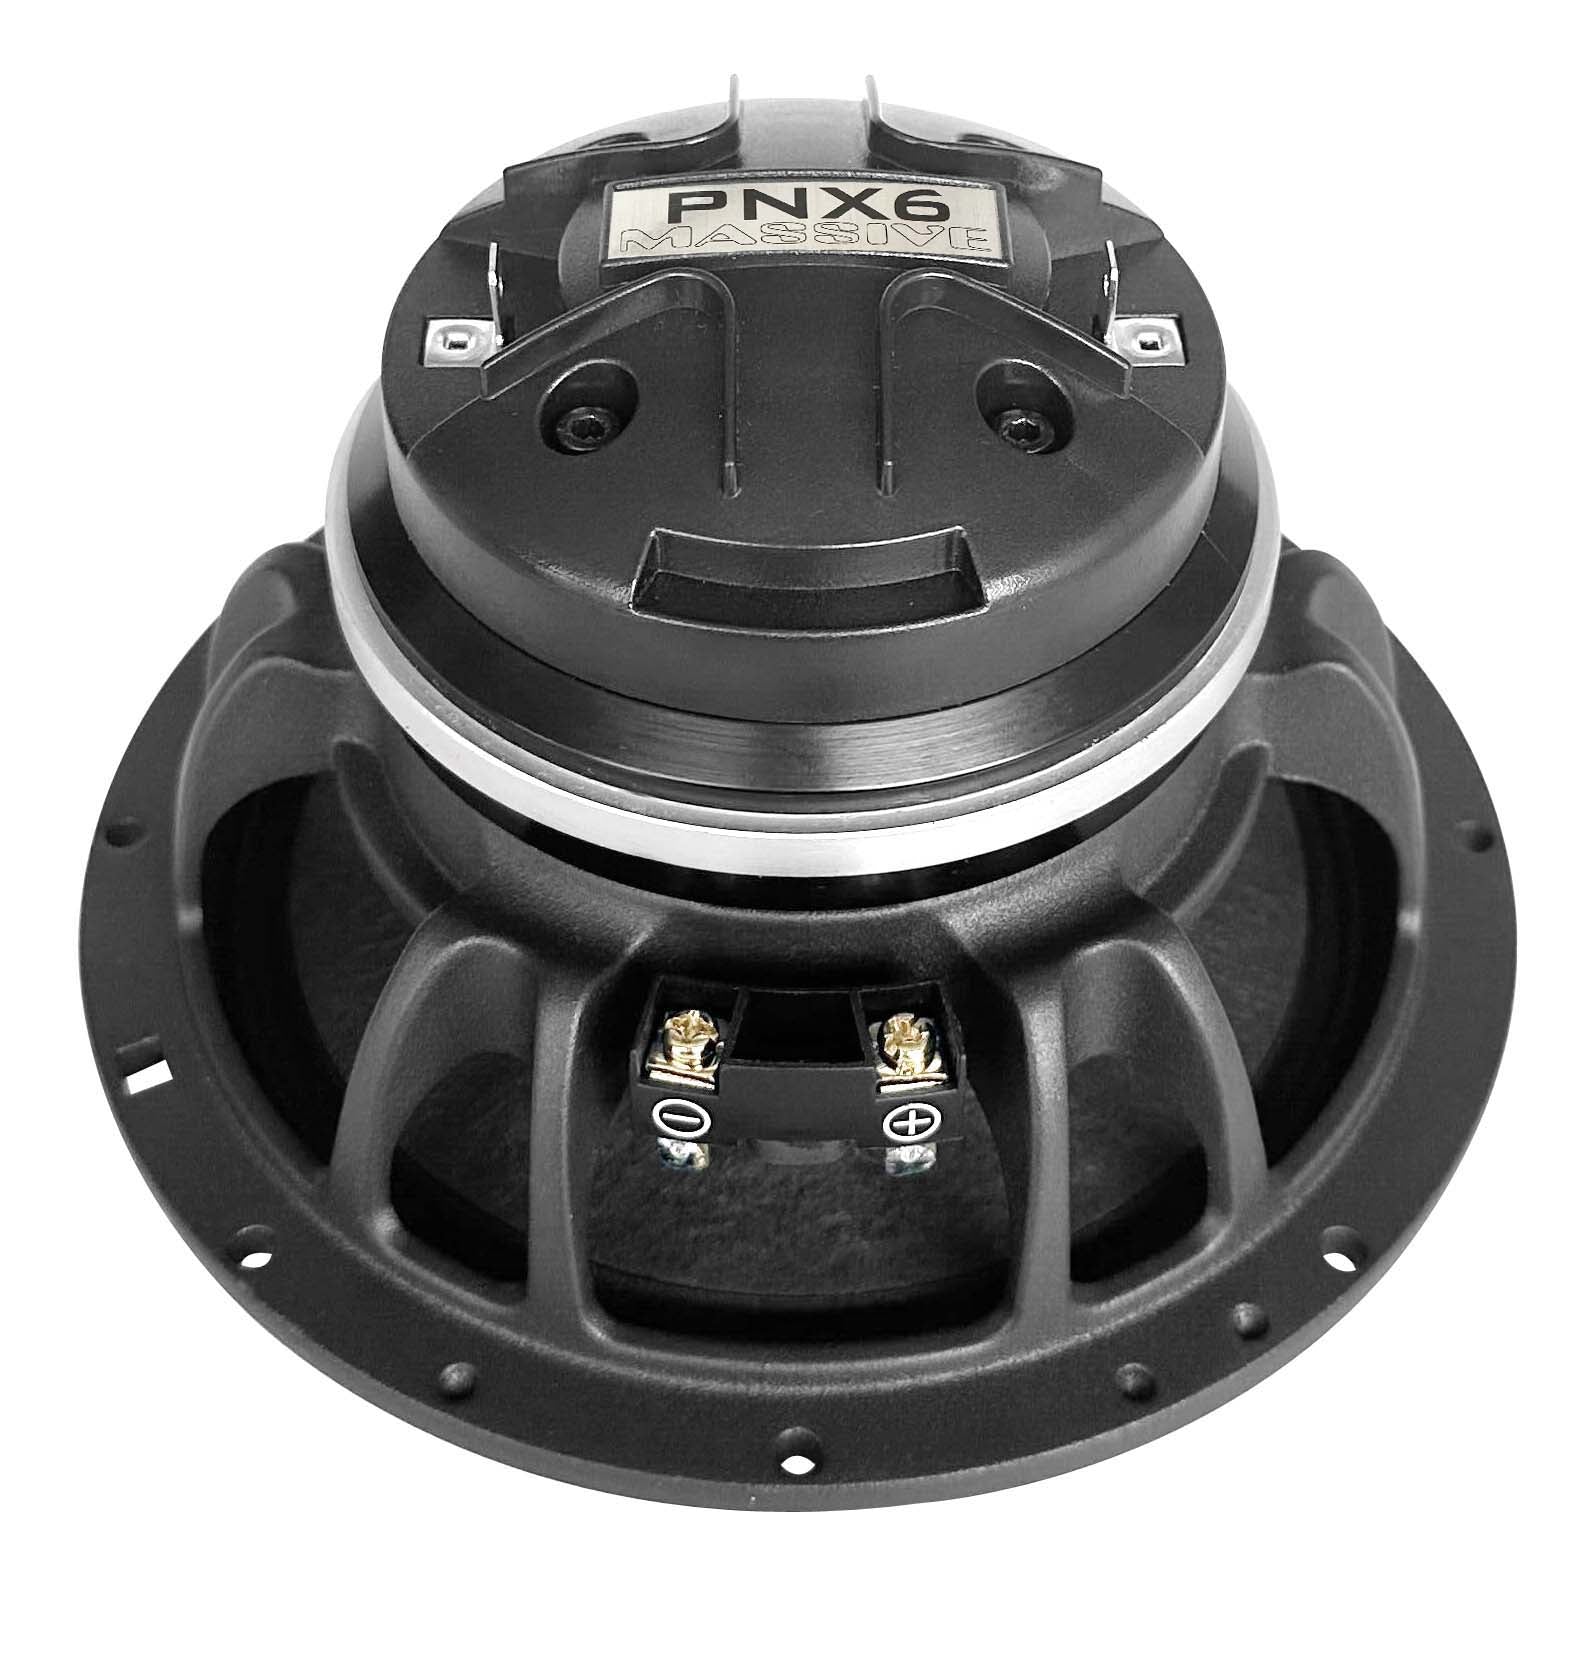 PNX6 | 6.5" 4 Ohm Mid-Range Pro Audio Coaxial Water Repellent Speaker - 160 Watts RMS